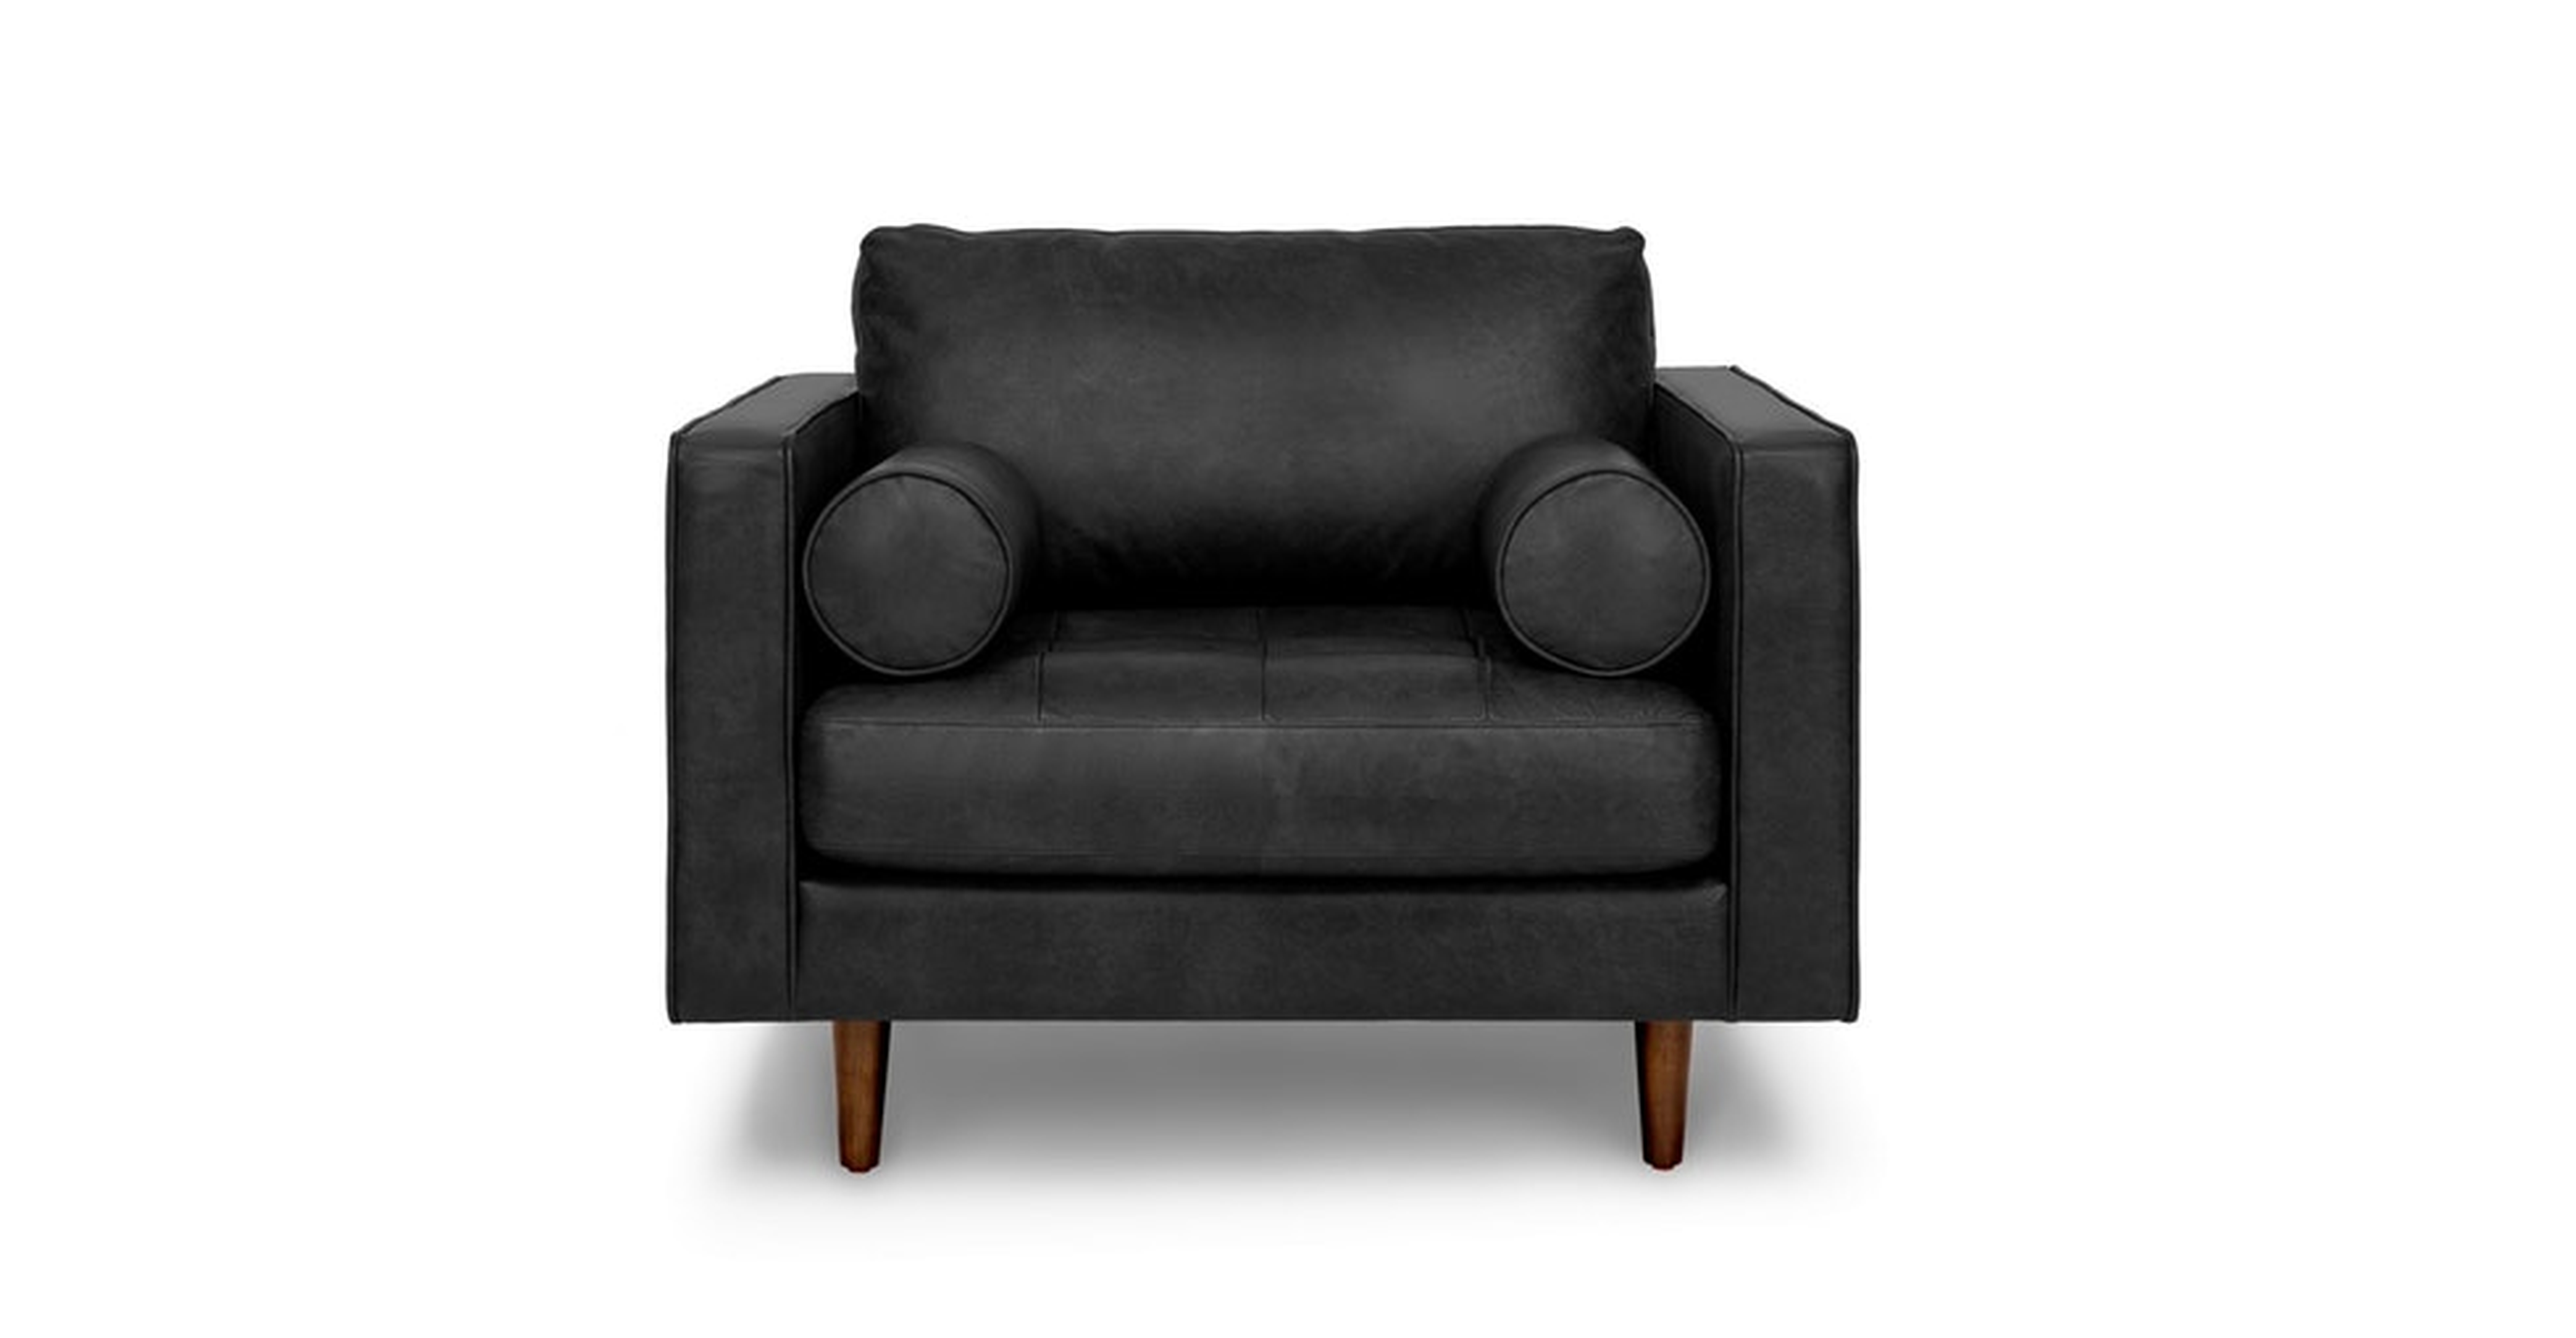 Sven Oxford Black Chair - Article